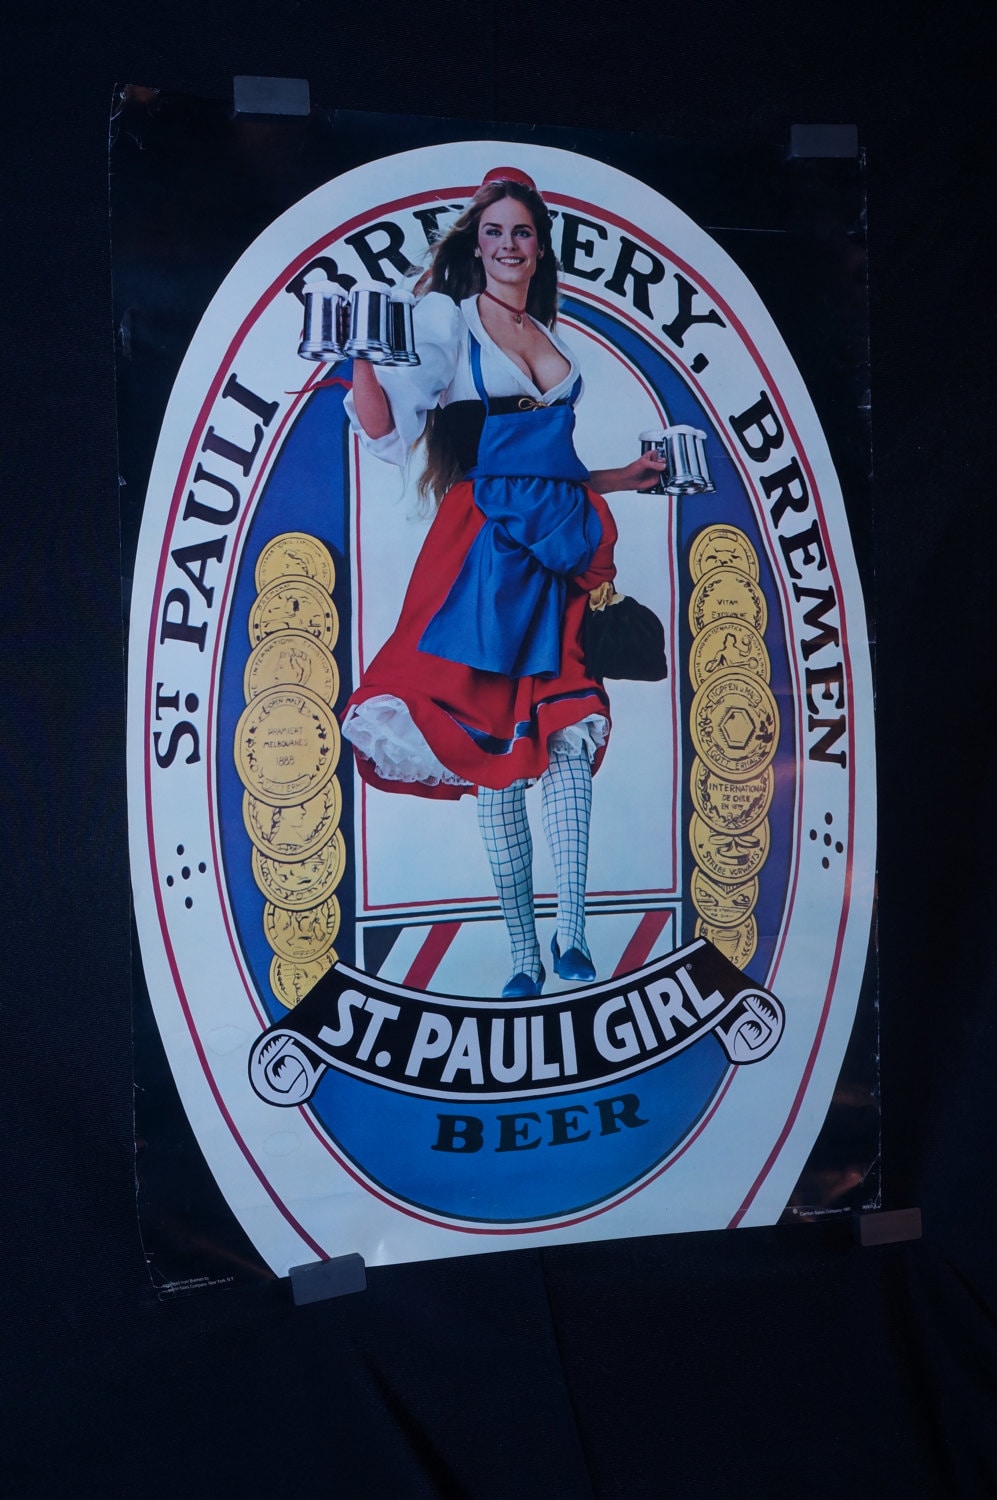 1980 St Pauli Girl Poster Brunette Hard To Find Think She May Be The Original St Pauli Girl